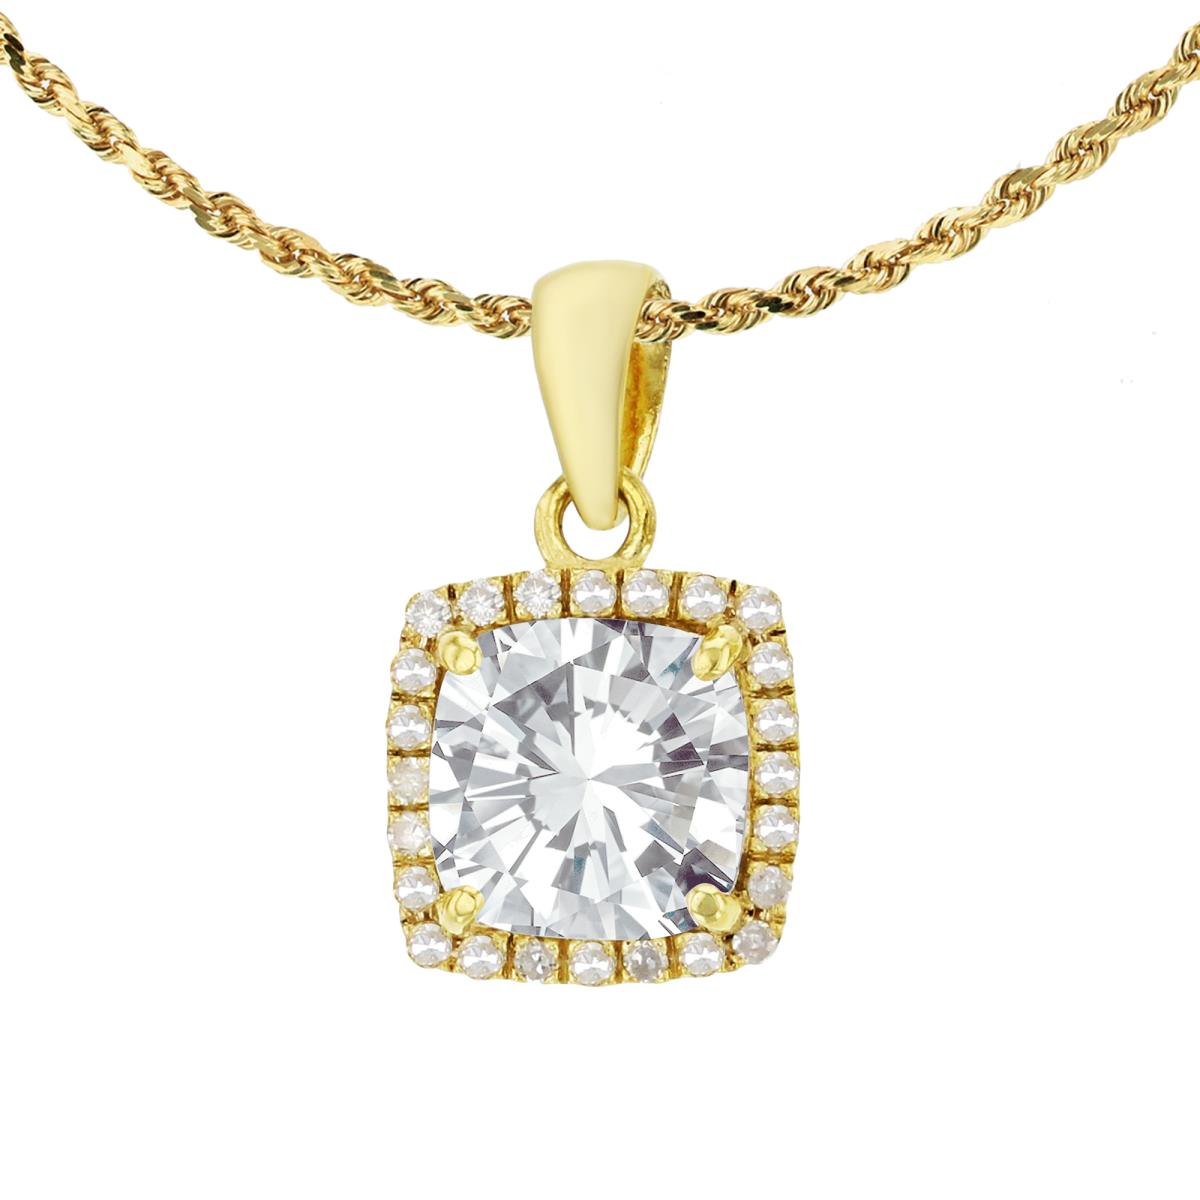 10K Yellow Gold 7mm Cushion White Topaz & 0.12 CTTW Diamond Halo 18" Rope Chain Necklace